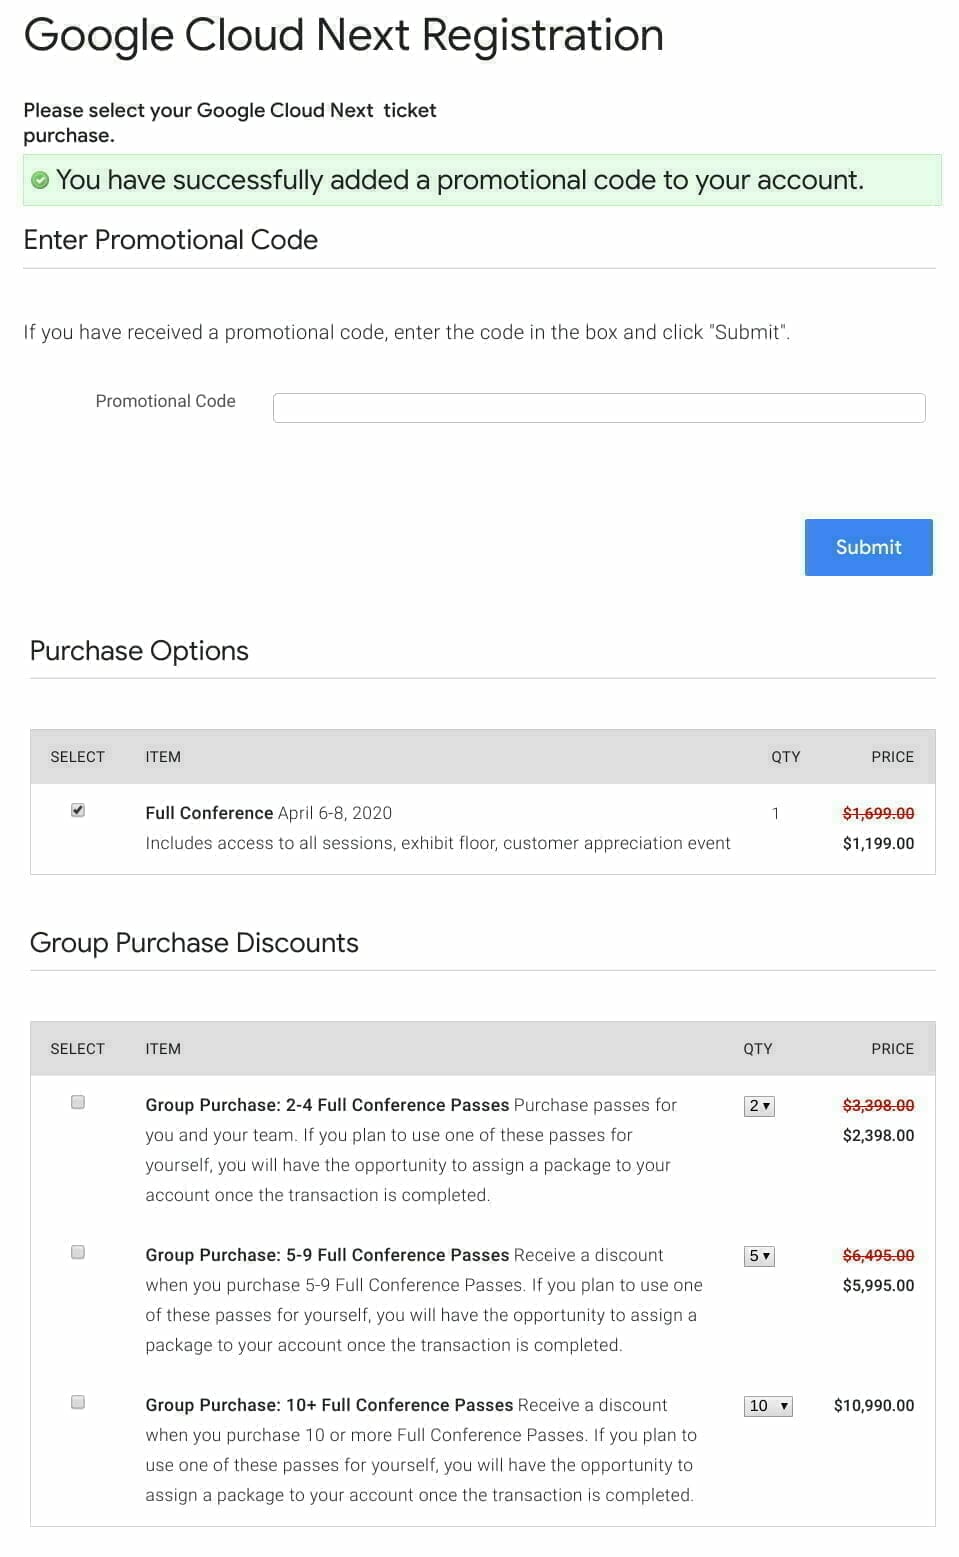 Google Cloud Next Registration with Promotional Code